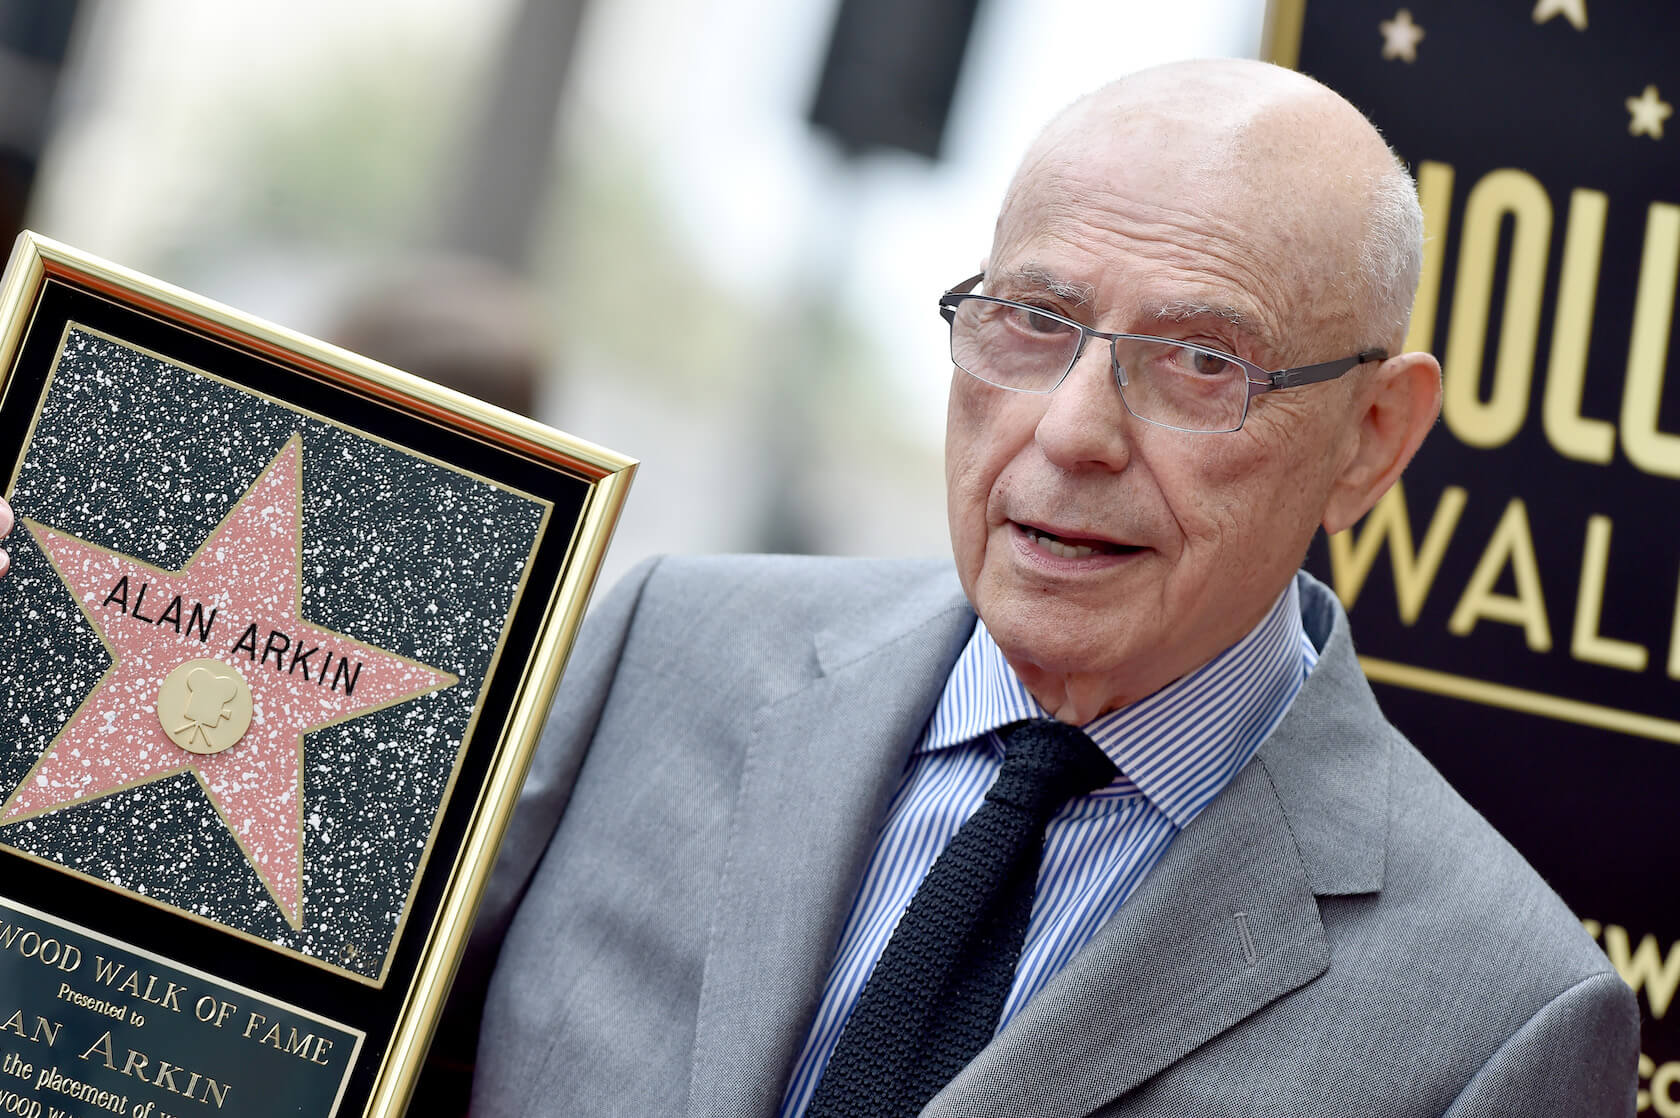 Actor Alan Arkin holding a Hollywood Walk of Fame star